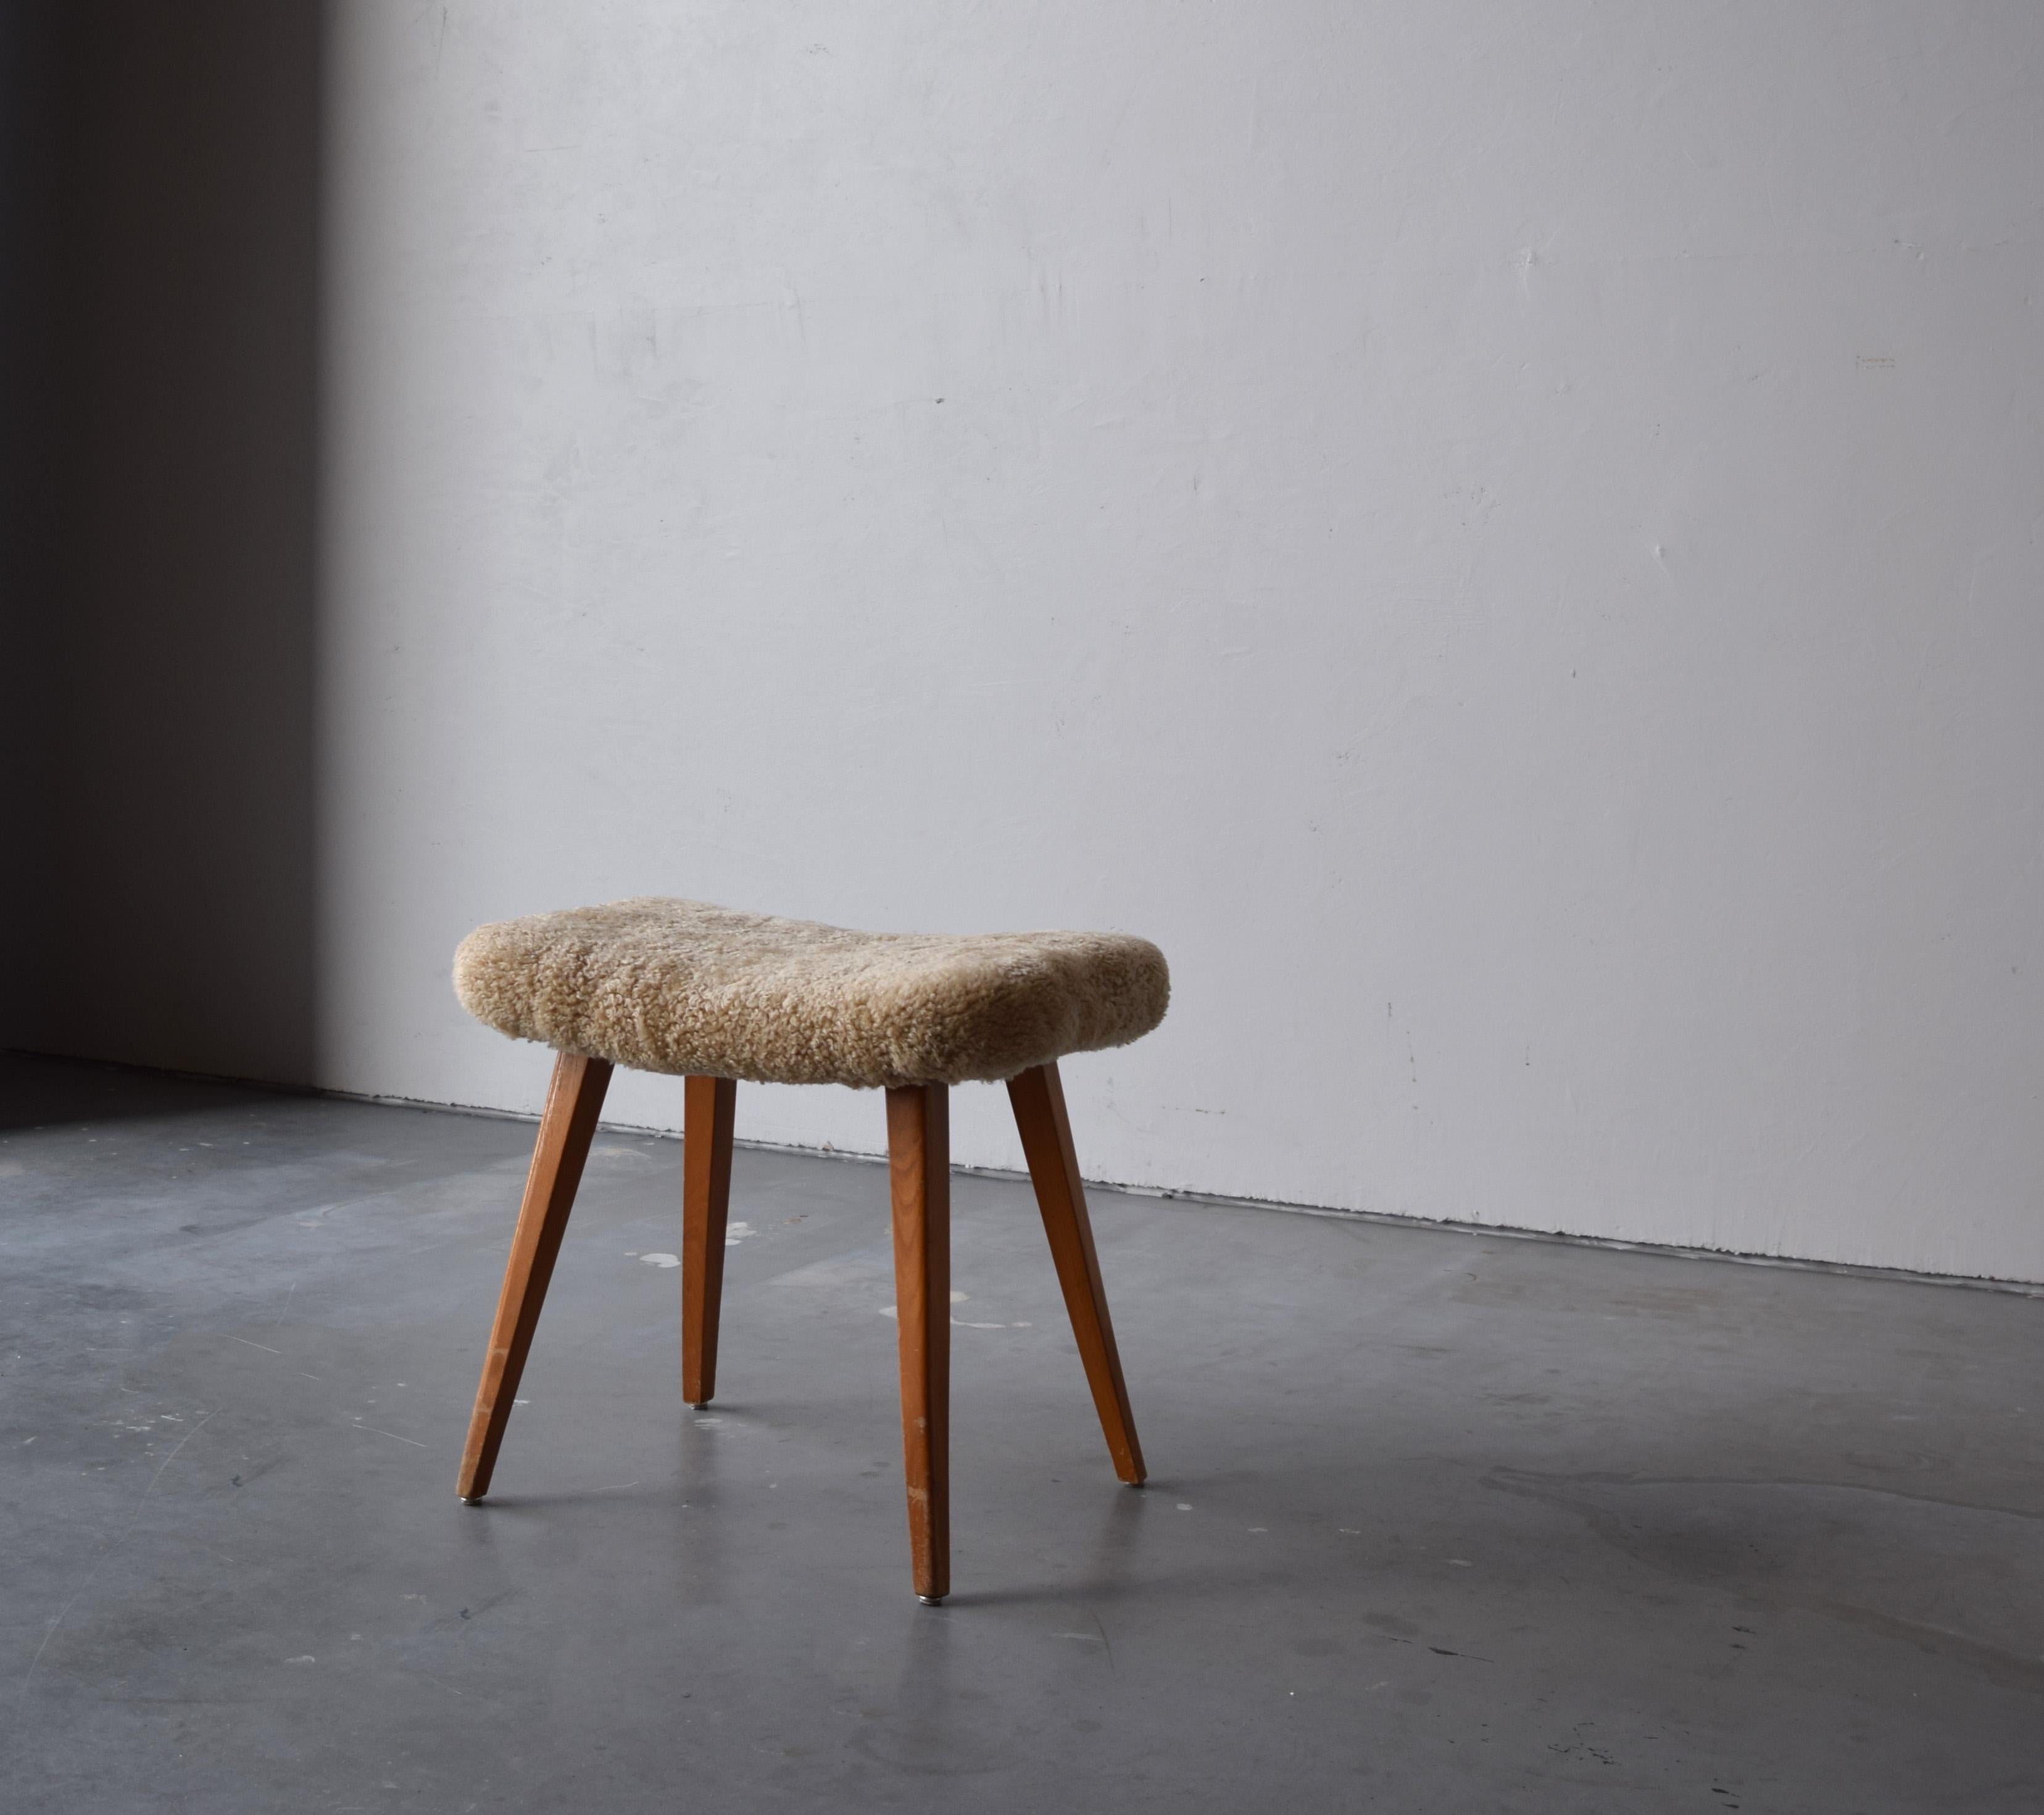 A stool in stained wood, overstuffed seat reupholstered in brand new sheepskin upholstery. Produced in Sweden, 1950s.

Other designers of the period include Finn Juhl, Hans Wegner, Isamu Noguchi, Charlotte Perriand.